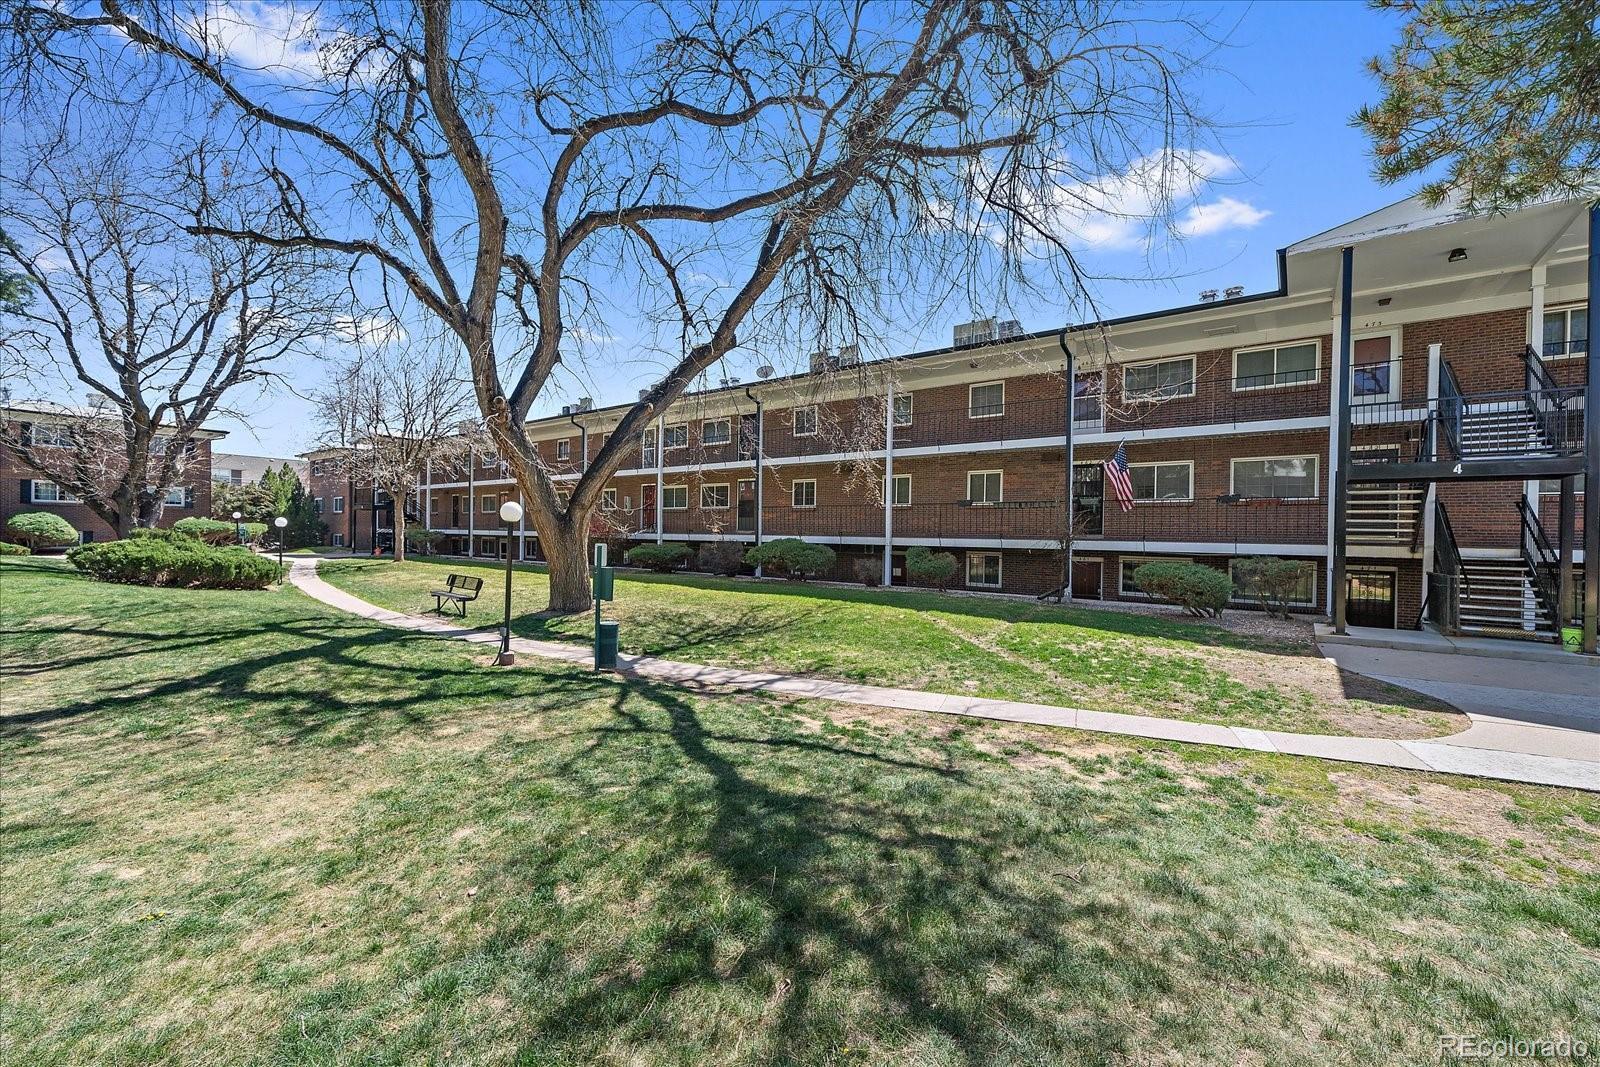 Photo one of 6800 E Tennessee Ave # 452 Denver CO 80224 | MLS 5291400